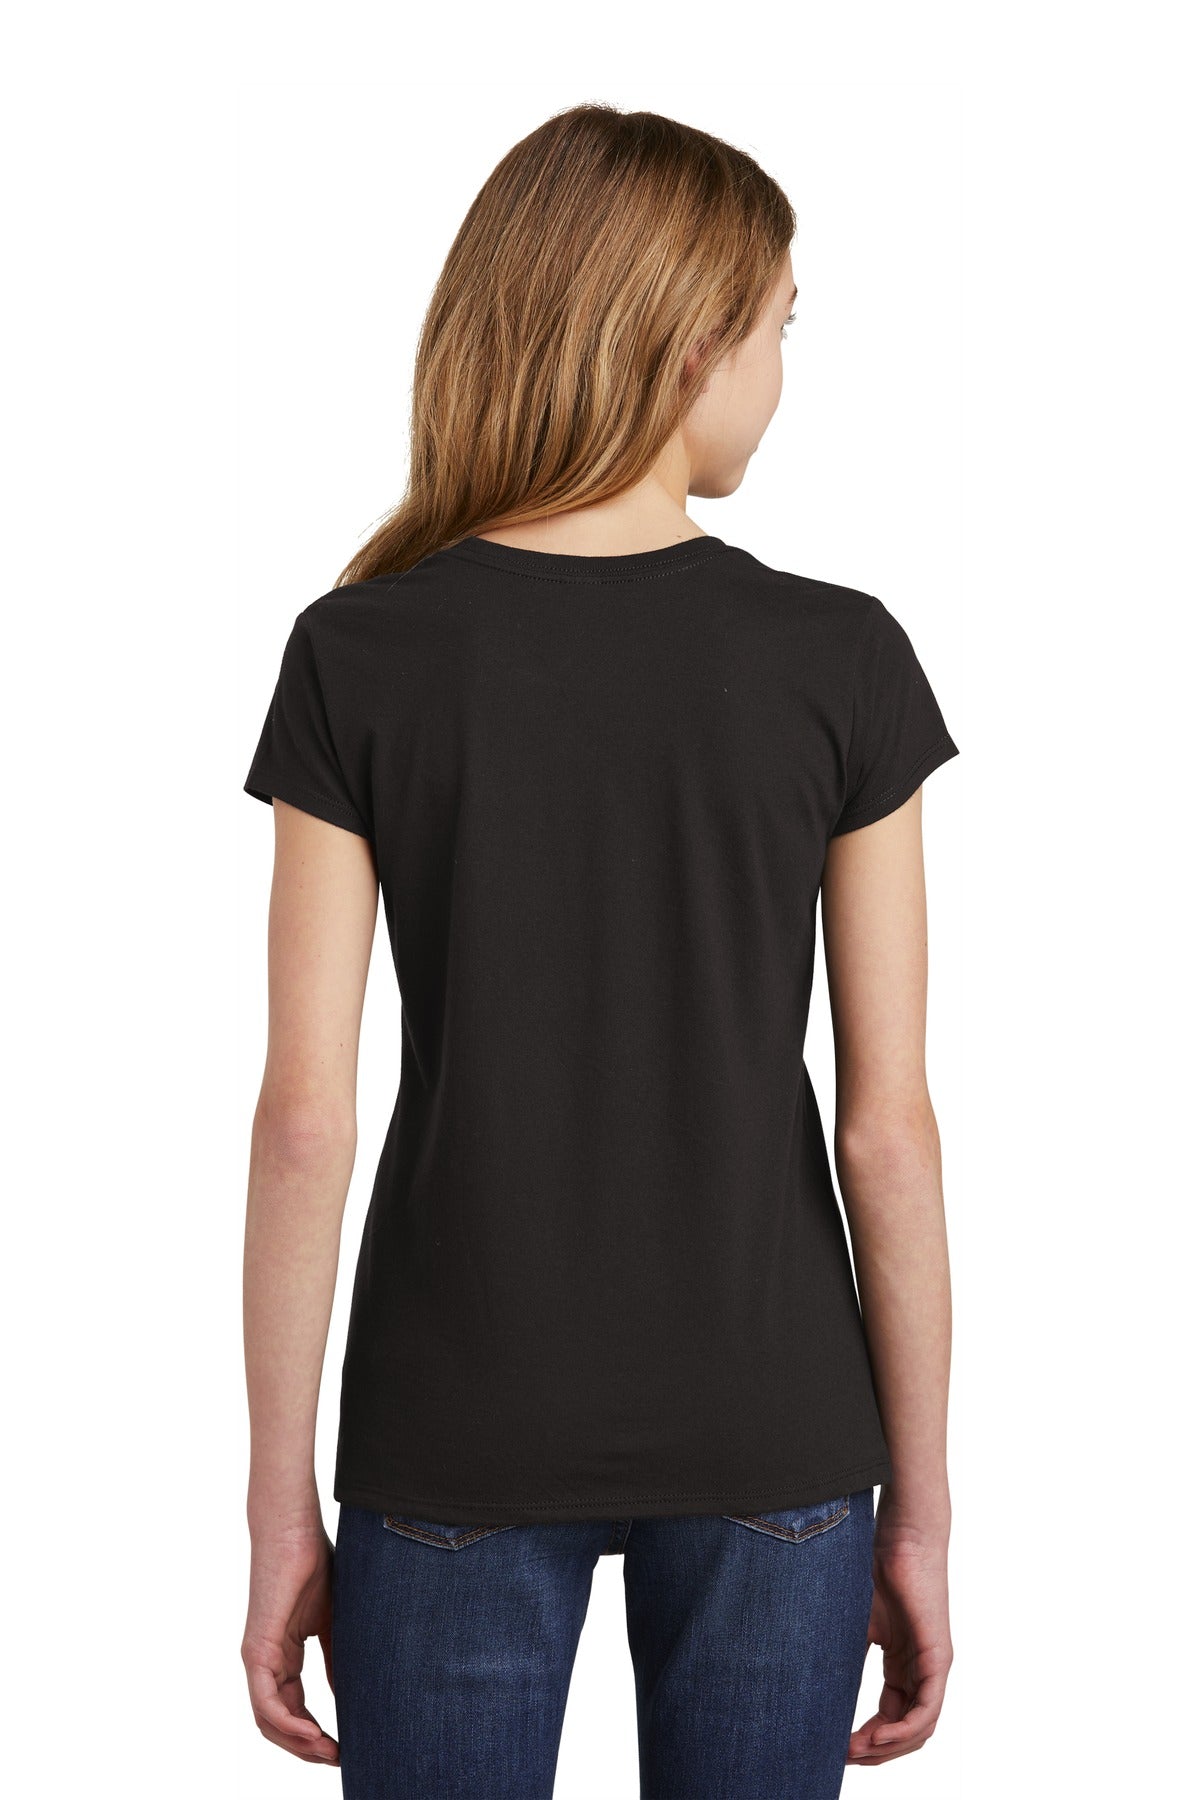 District Girls Very Important Tee .DT6001YG